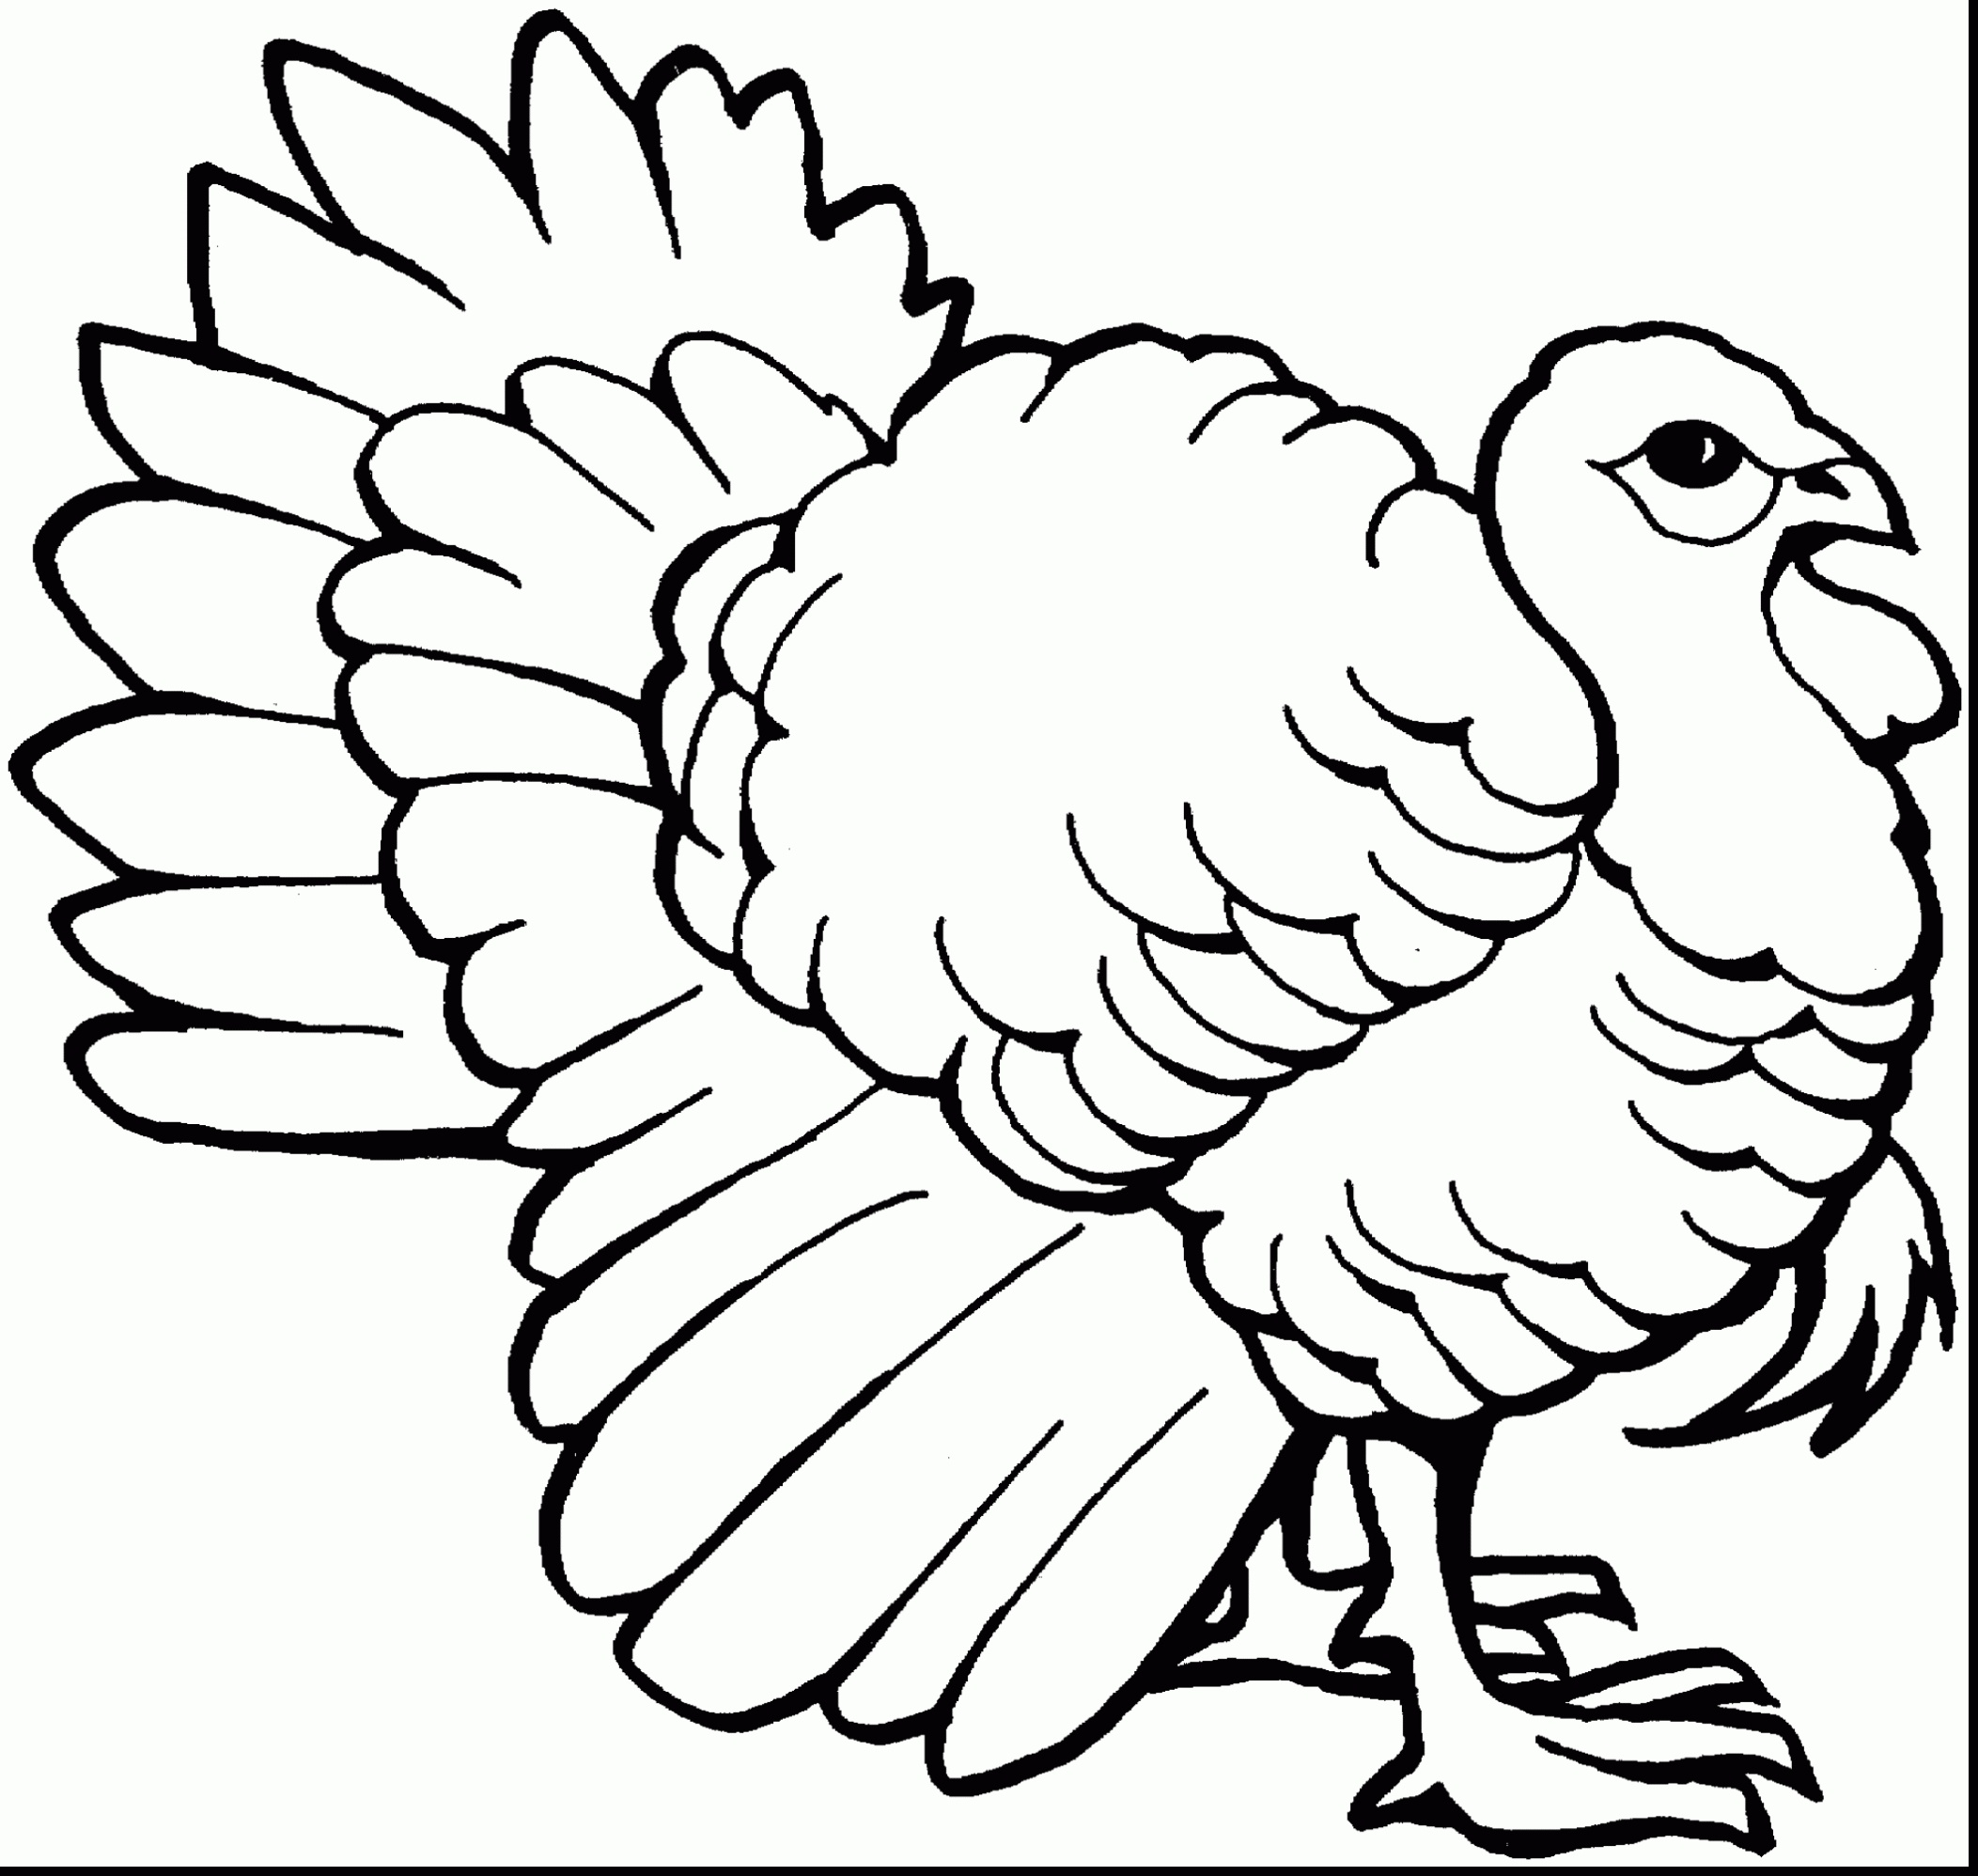 Coloring Ideas : Kidsoring Turkey Page Thanksgiving Books For First - Free Printable Turkey Coloring Pages